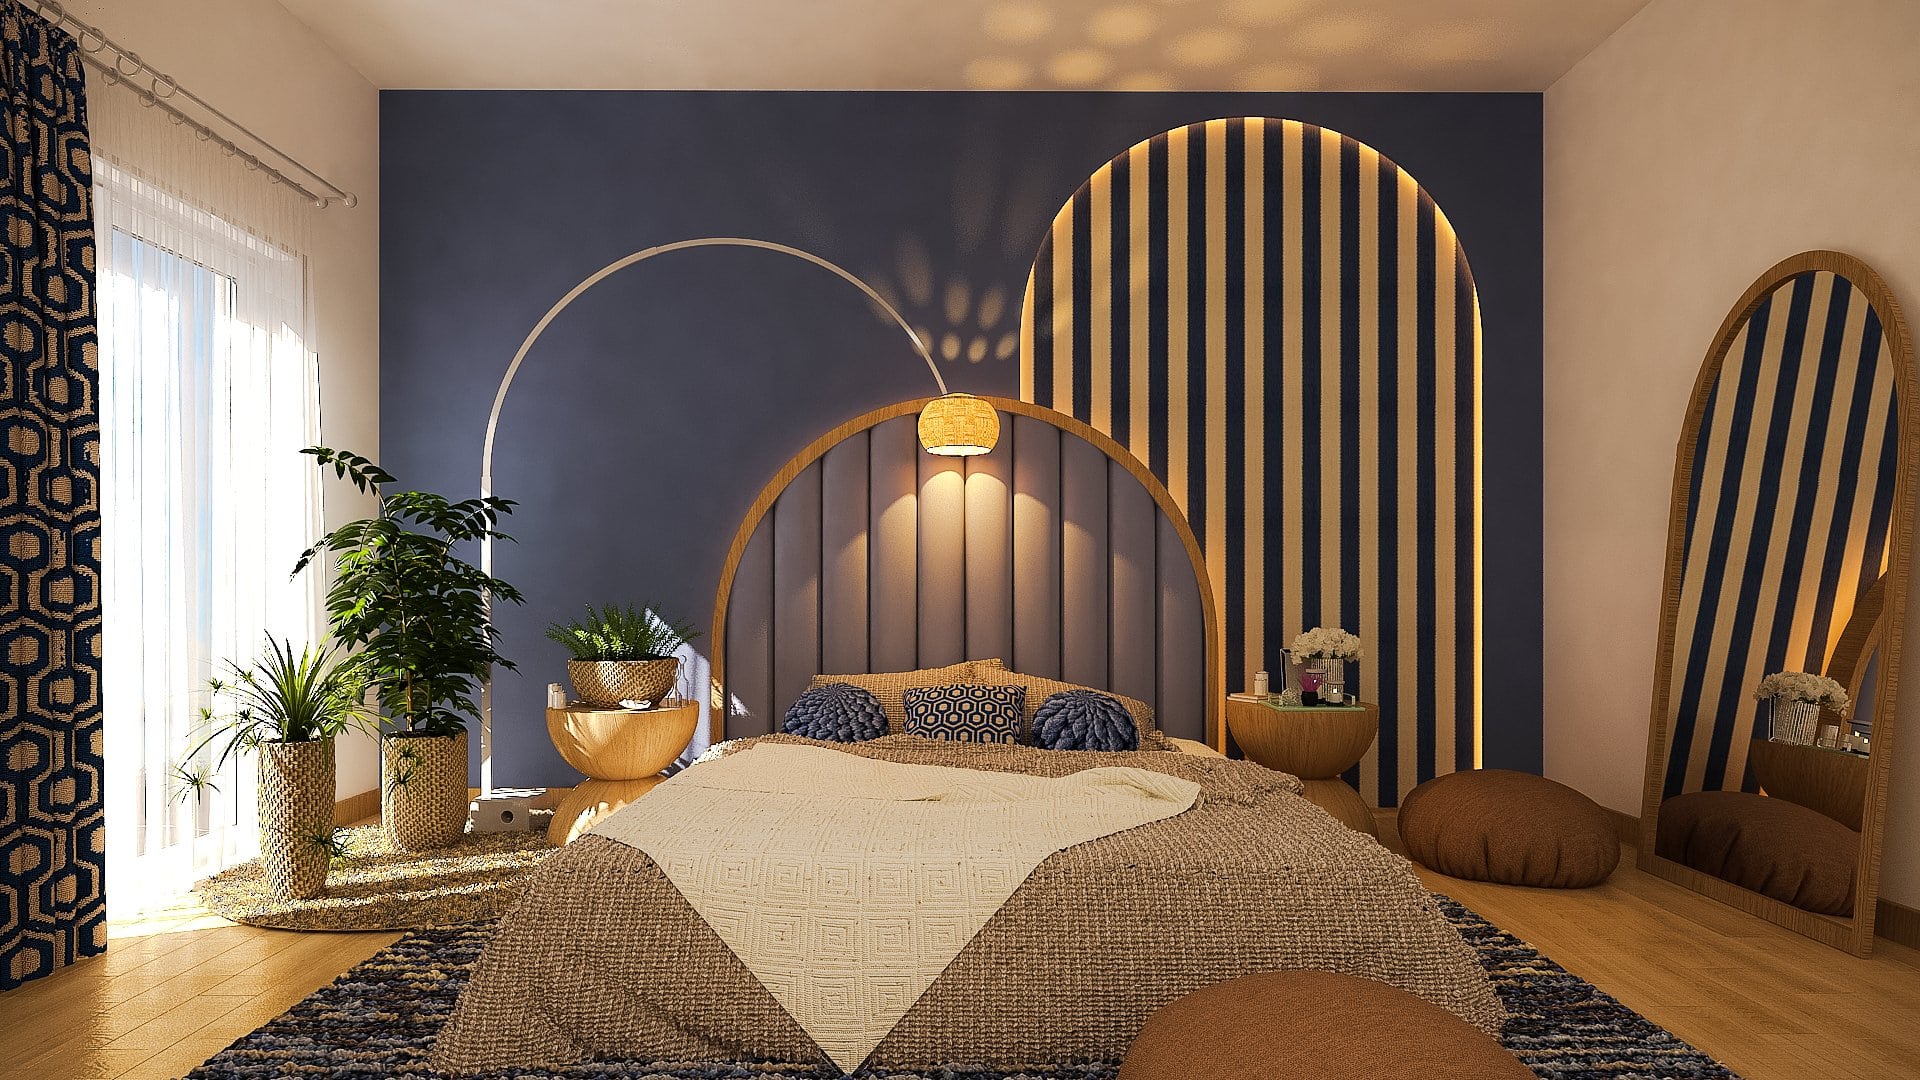 Arches & curves in bedroom decor ideas for 2023 by Homilo